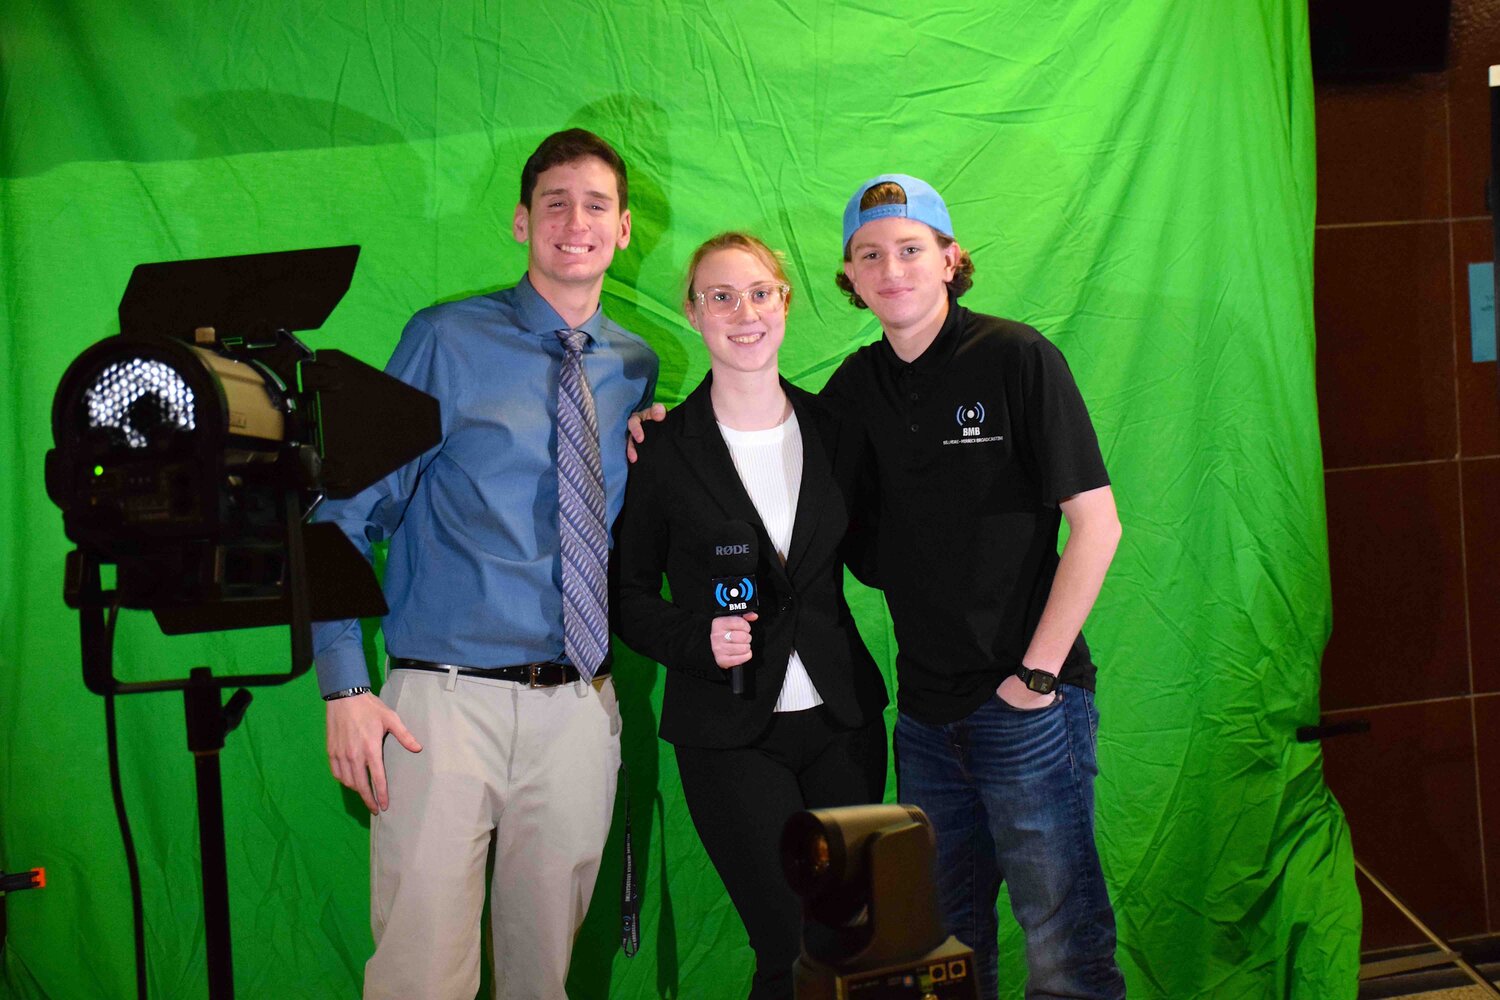 Tyler Steinberg, Brianna Boland and Ryan Marr of Bellmore-Merrick Broadcasting showed off the program’s green screen, giving visitors the chance to be weather forecasters.